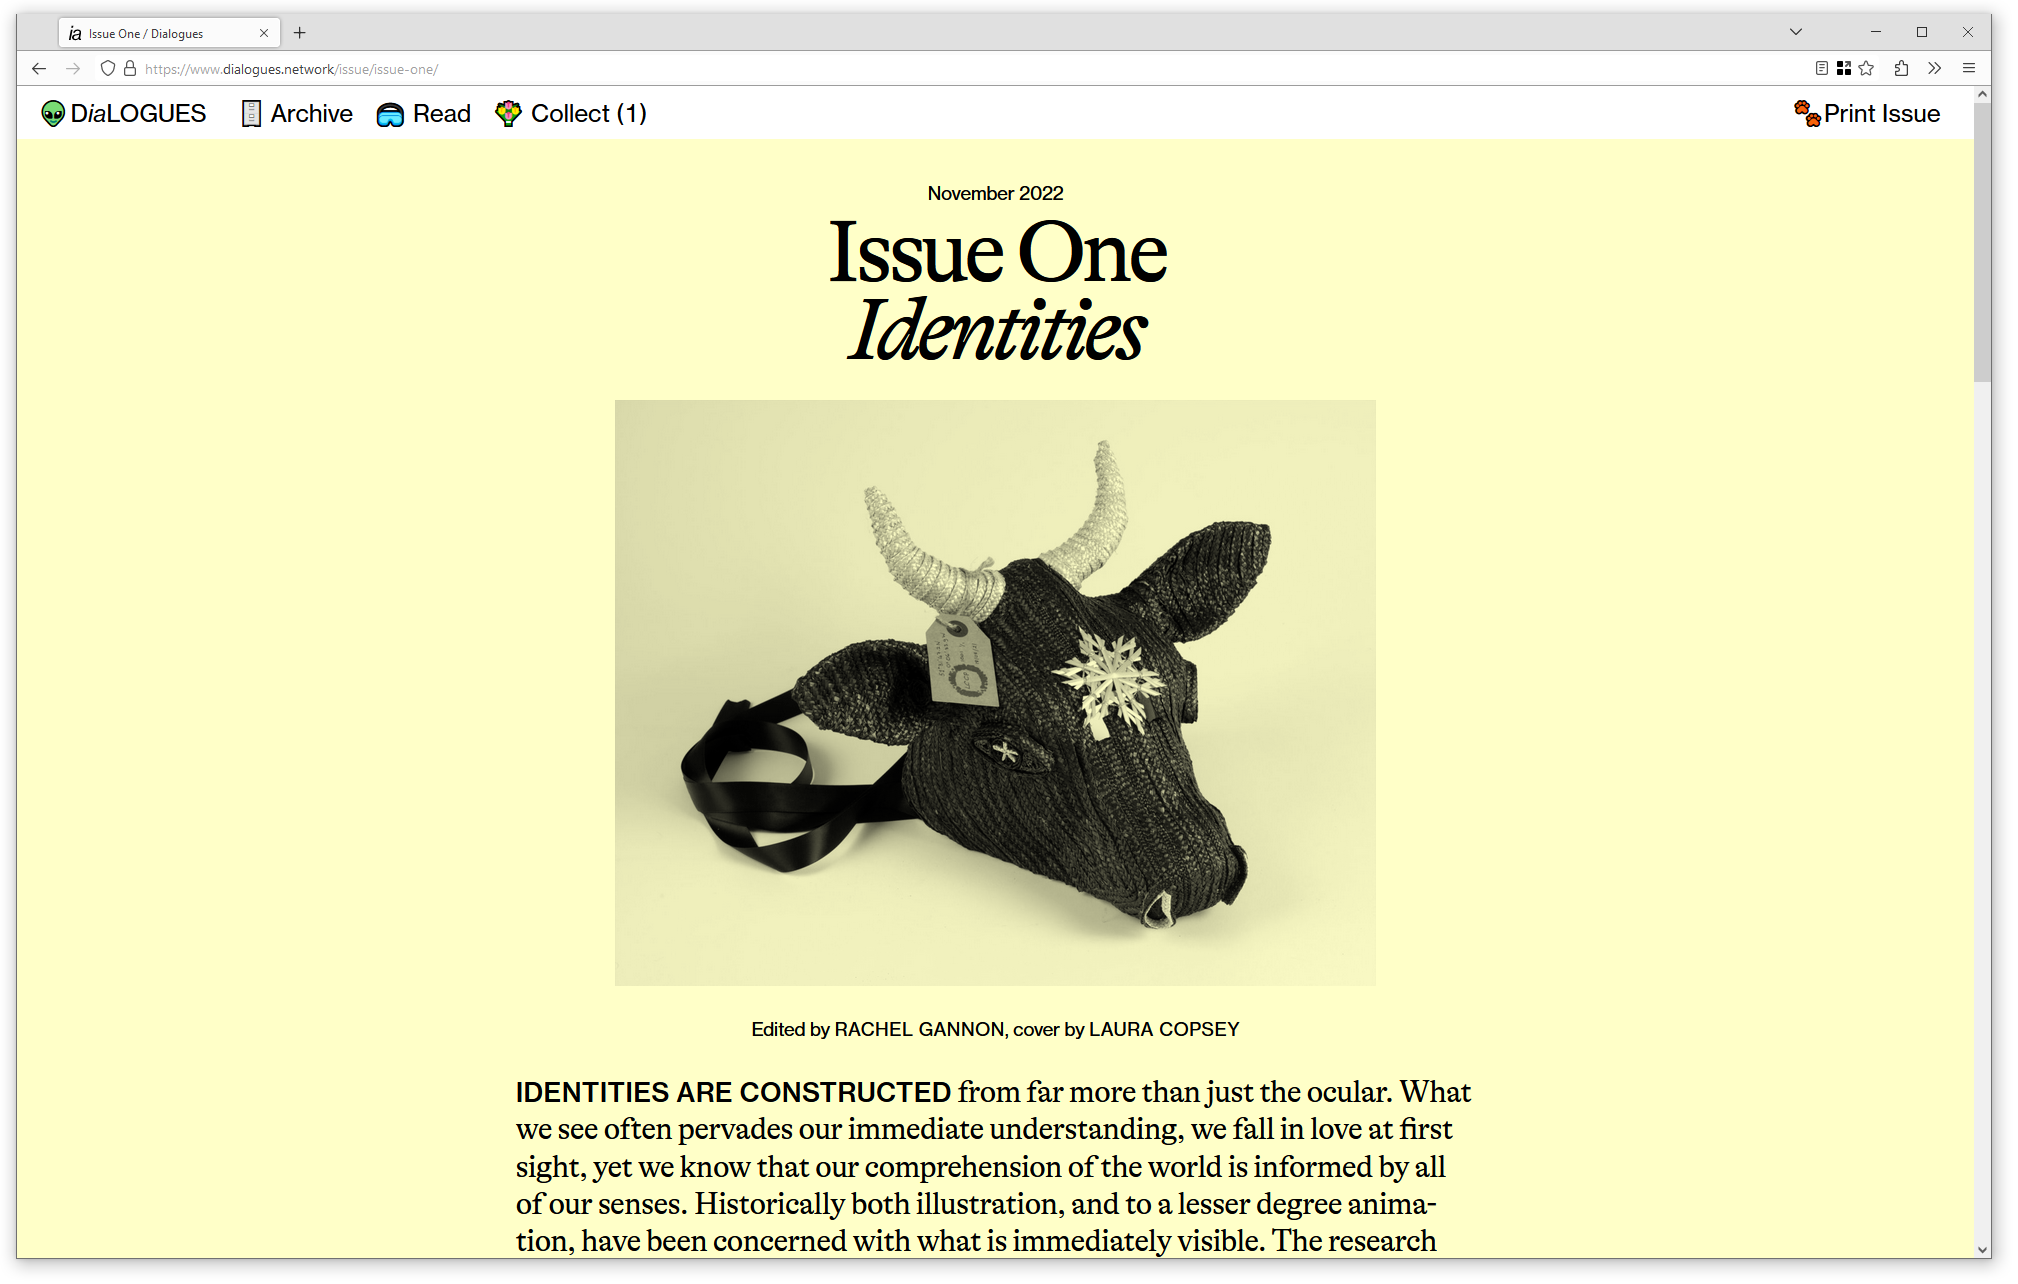 Screenshot shows website with article in large serif type on light yellow background. Title reads: Issue One / Identities, a photograph of a bulls' head made of paper-mache is seen.